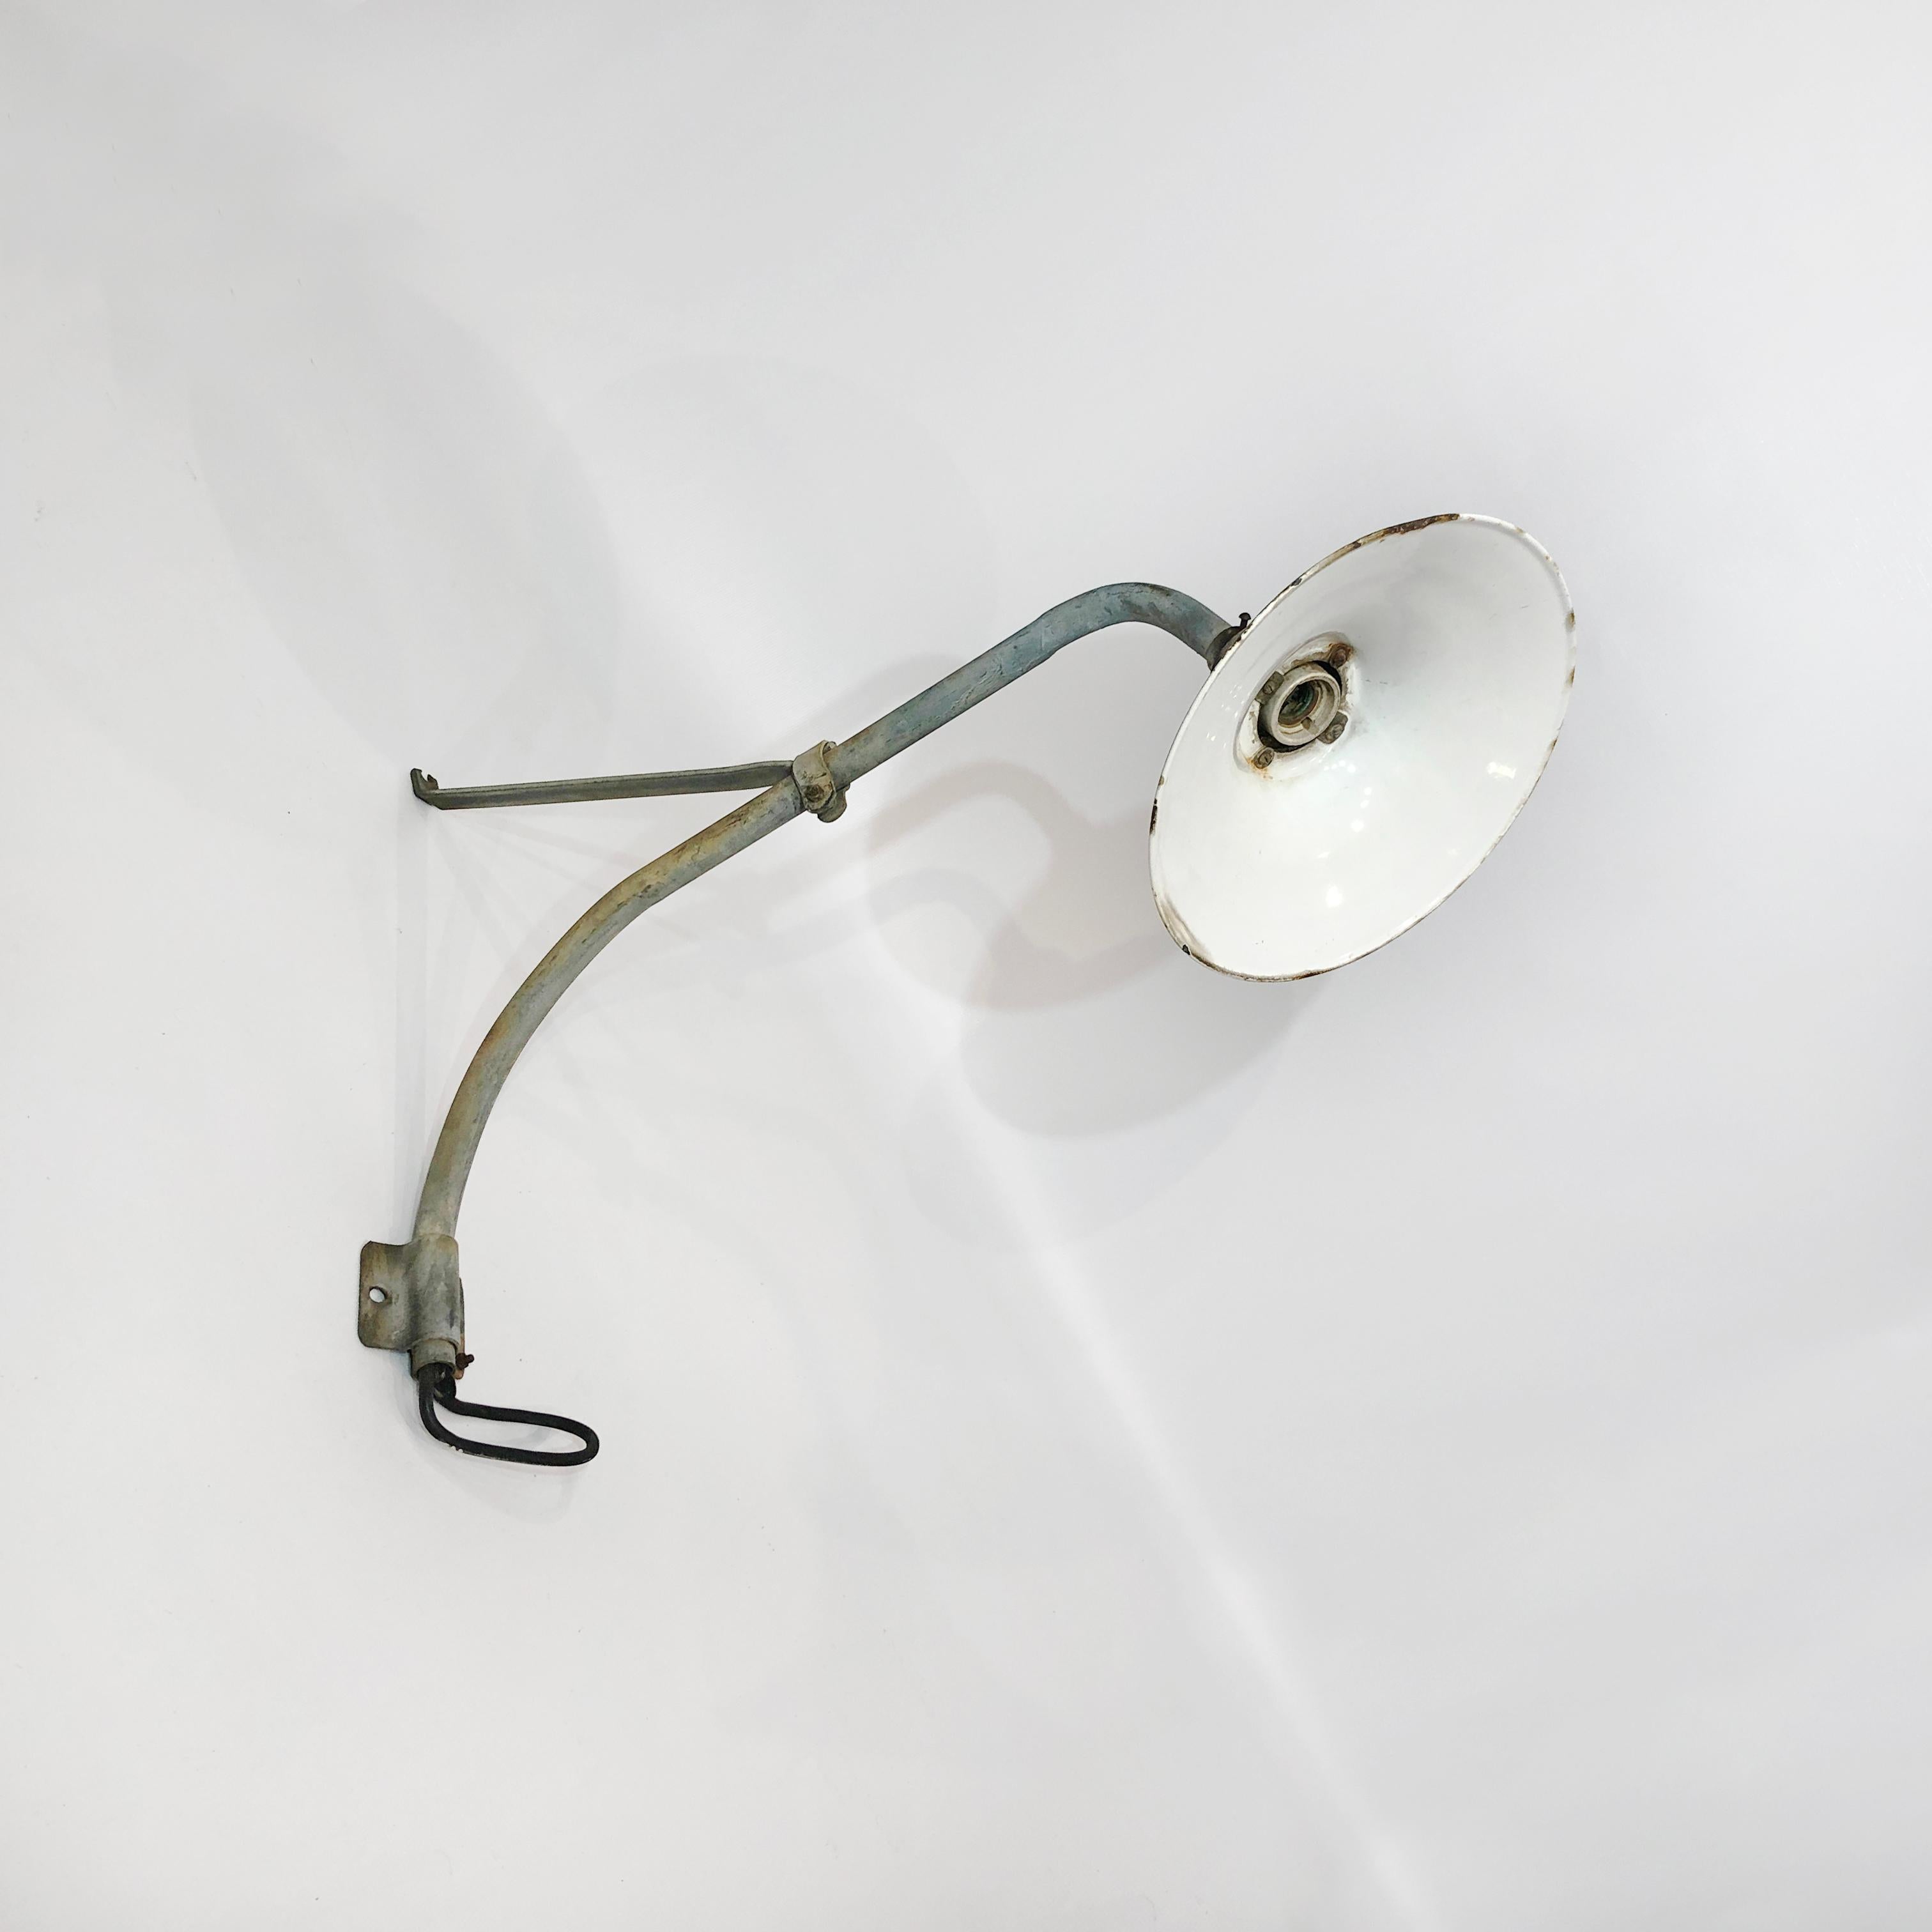 Enamel Large Industrial Wall Light 2 of 3 50s Vintage Retro Commercial Lighting Lamp  For Sale